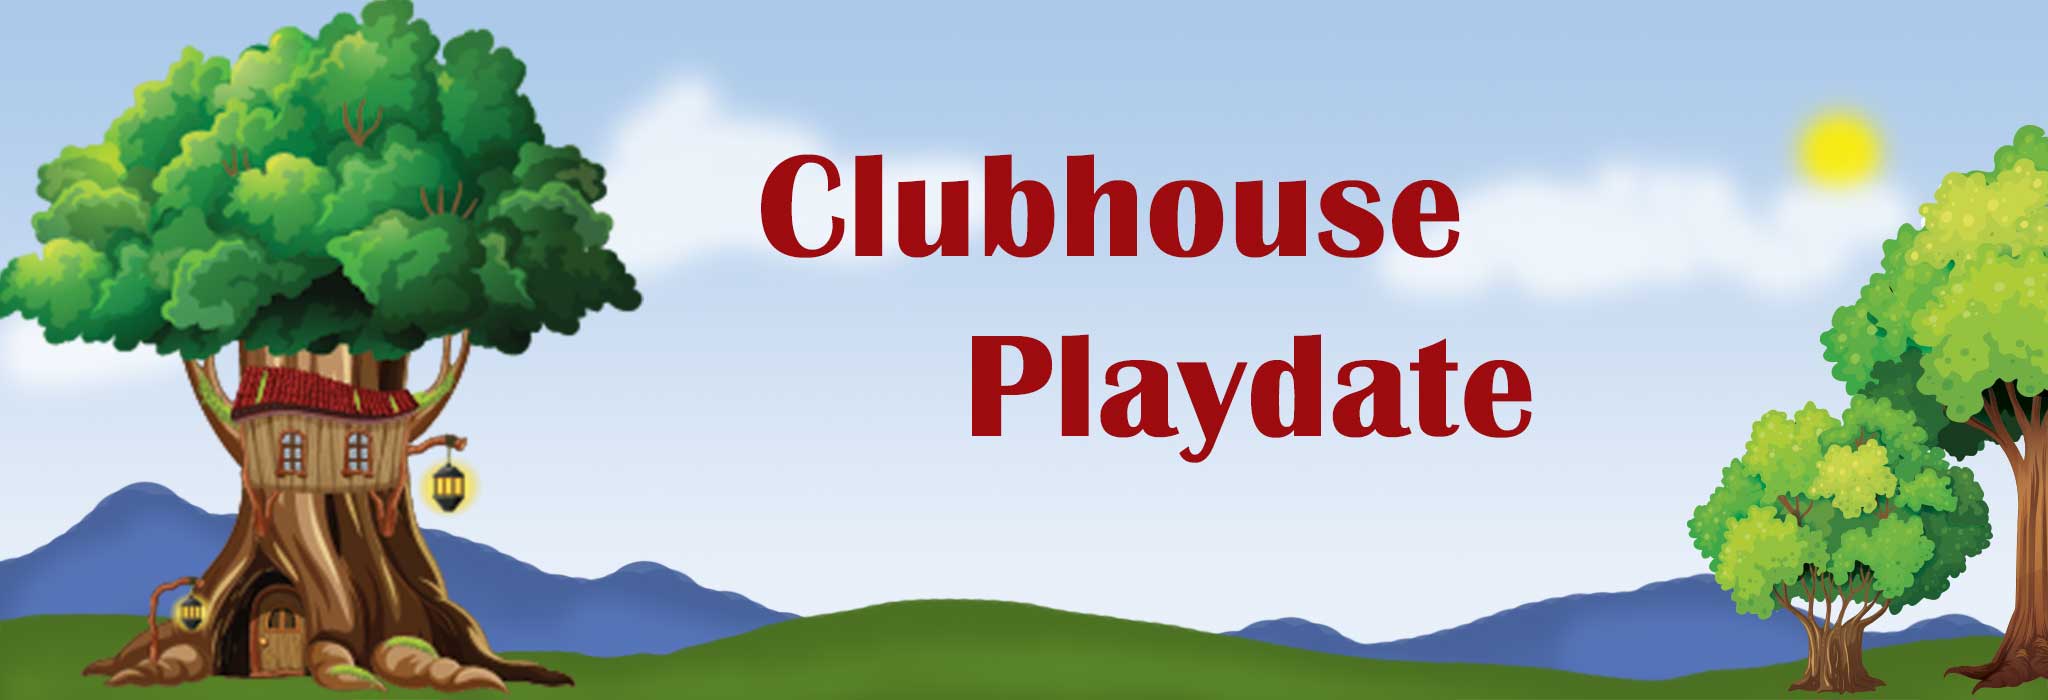 Clubhouse Playdate